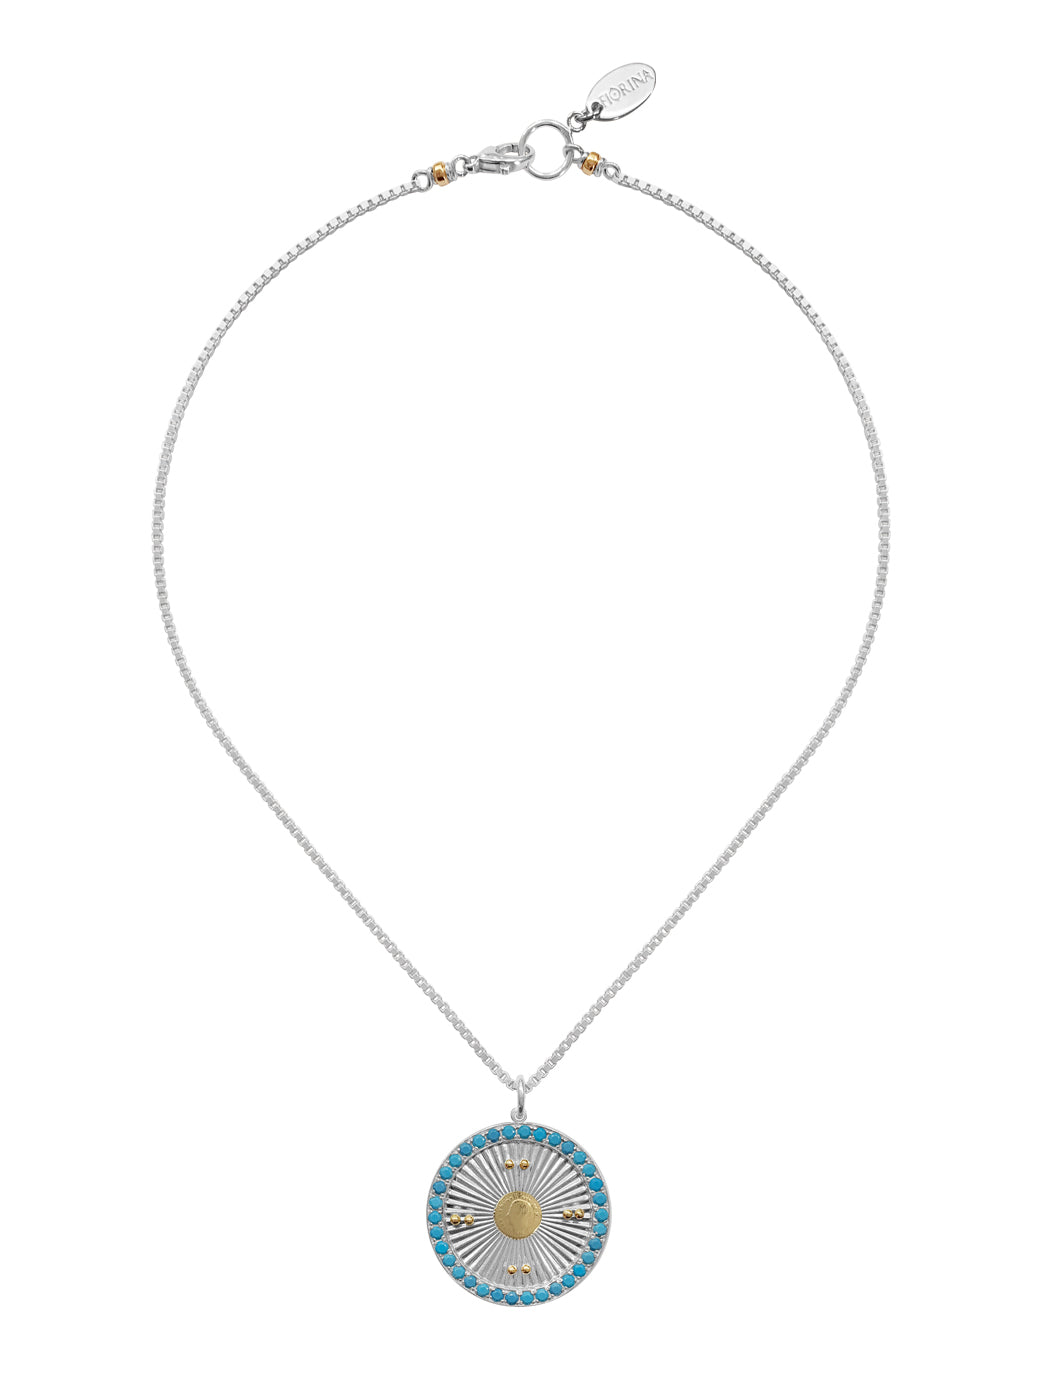 Fiorina Jewellery Sunday Necklace Turquoise Coin